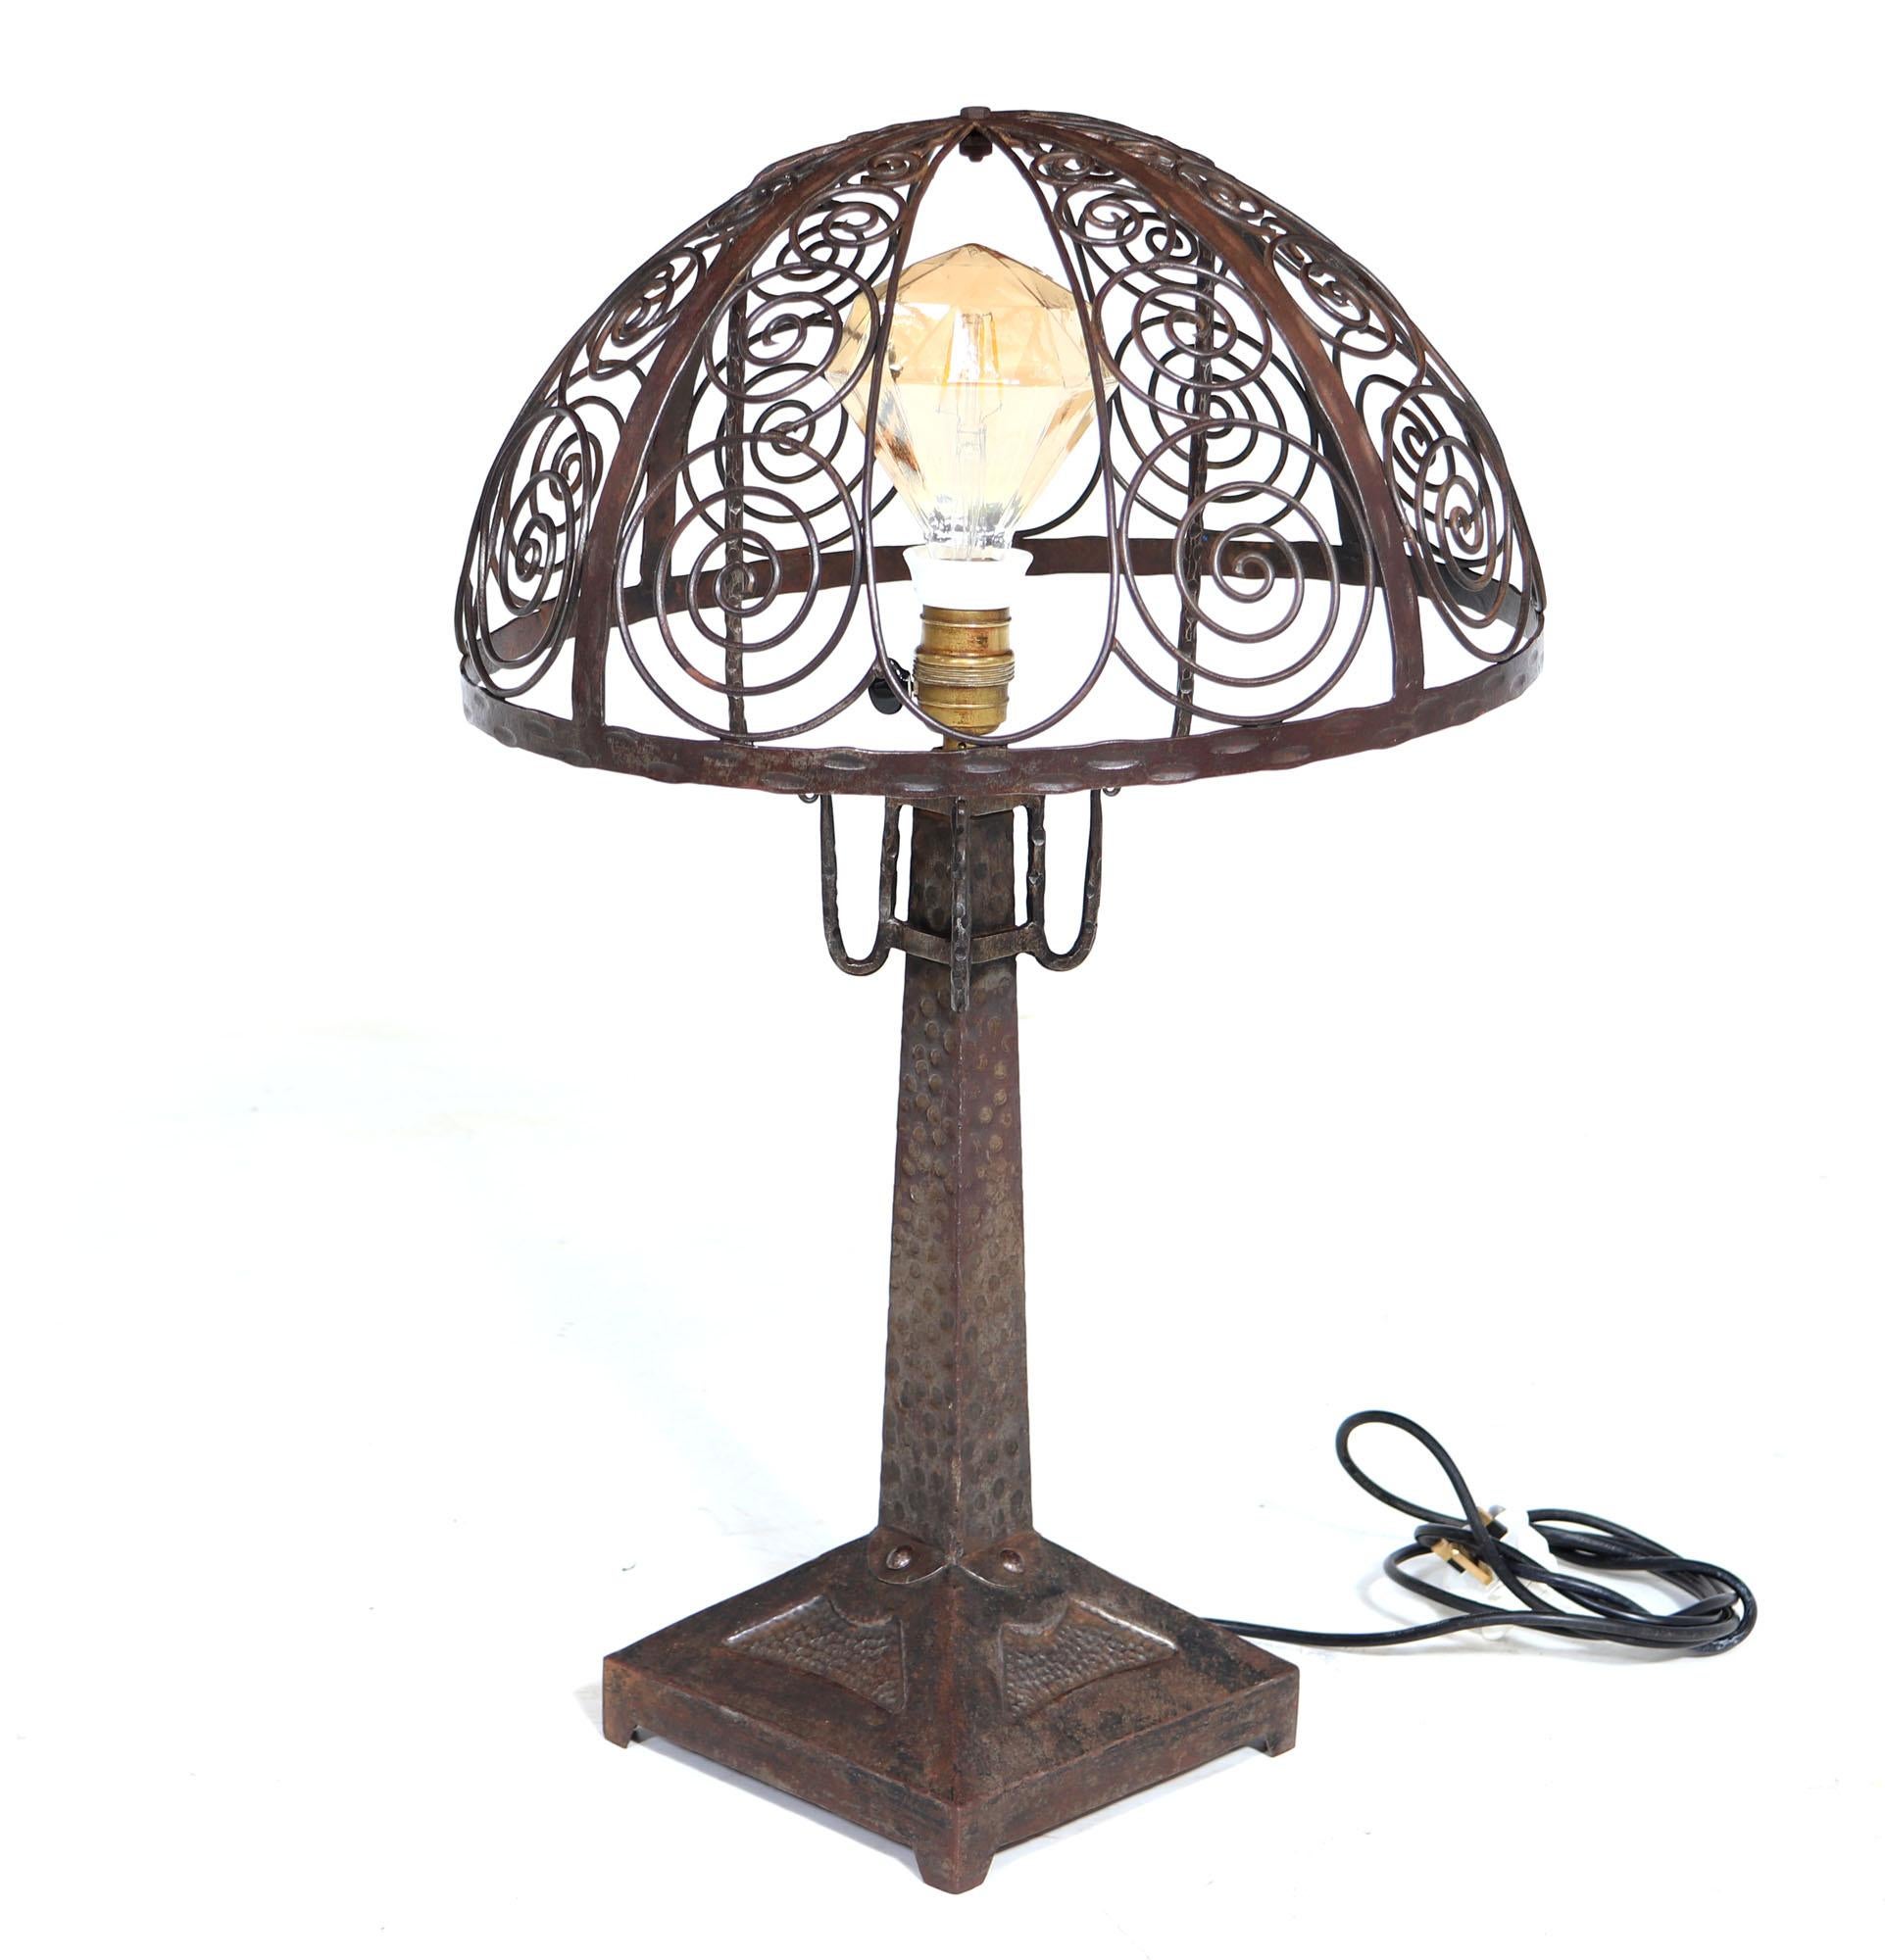 ART DECO LAMP
A very impressive and unusual Wrought iron table lamp produced in France in the 1930’s standing on an angular upright base with hammered detail the lamp has a good sized open ironwork top. This has never had fabric or glass attached